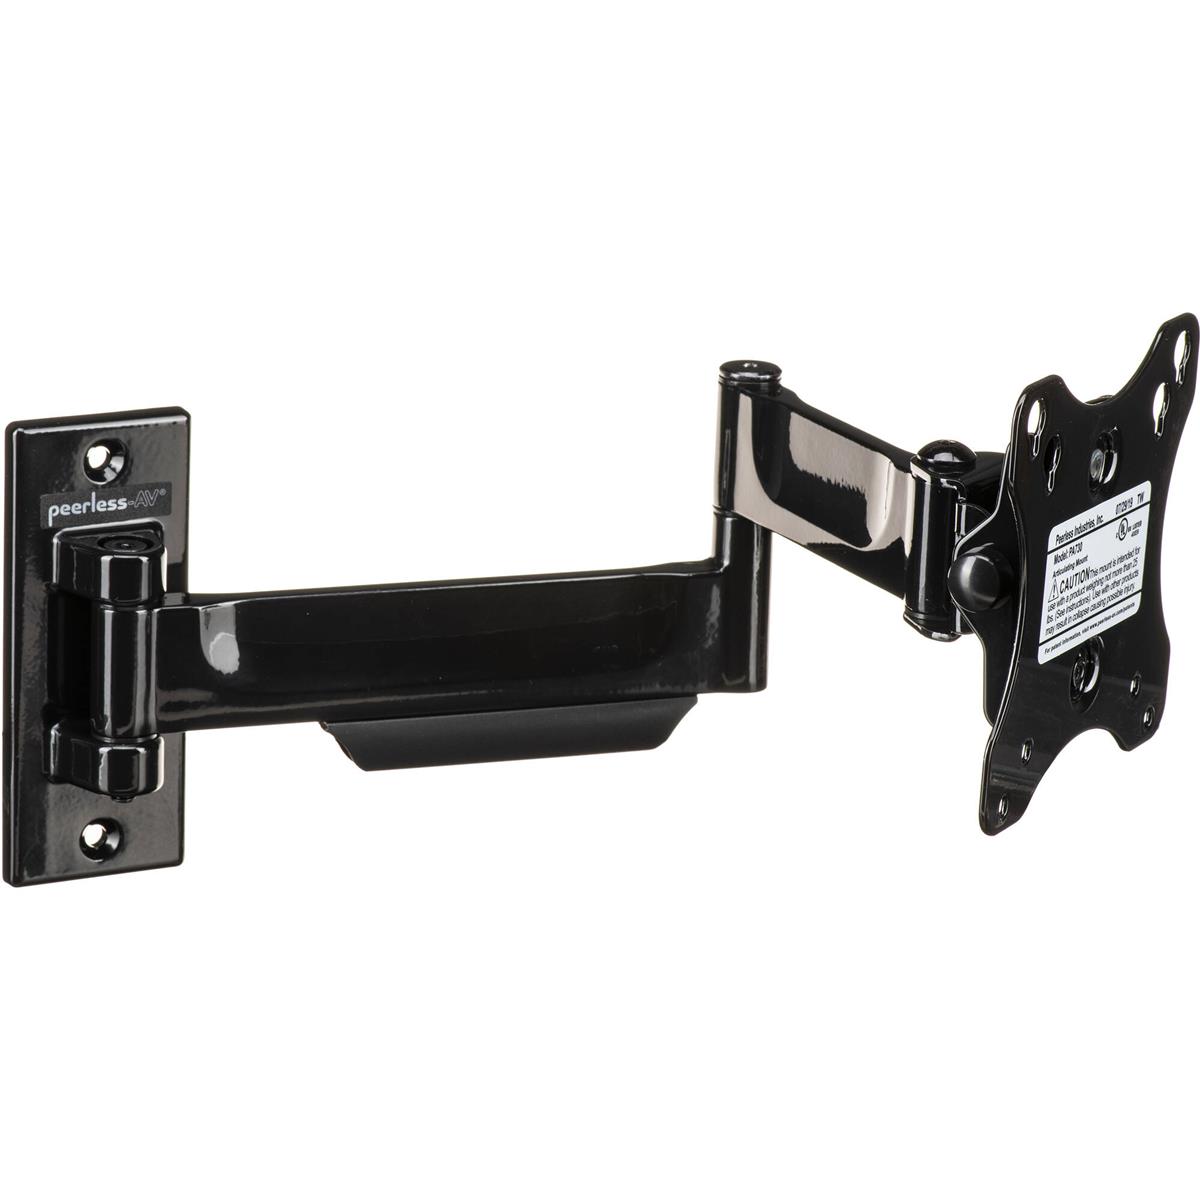 Image of Peerless PA730 Pro Articulating Arm Wall Mount